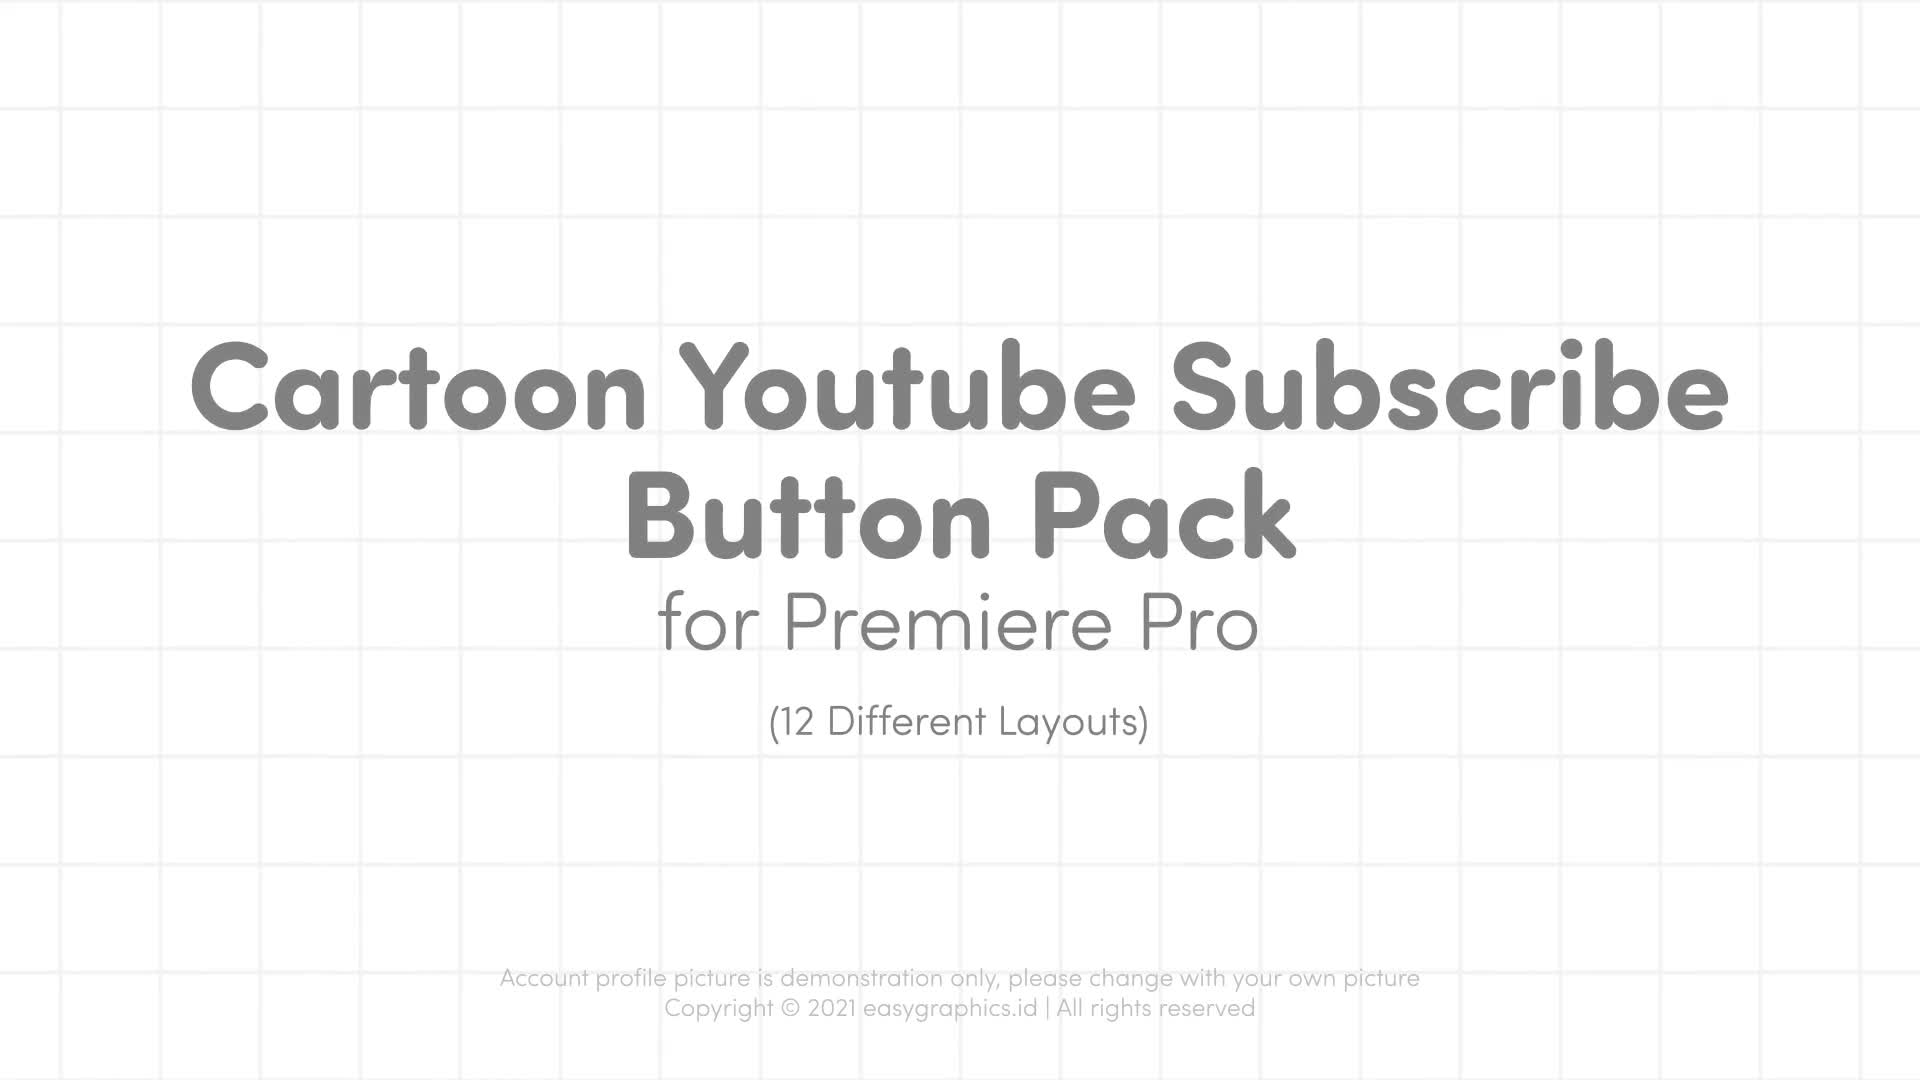 Cartoon Youtube Subscribe Button Pack for Premiere Pro Videohive 32580124 Premiere Pro Image 1